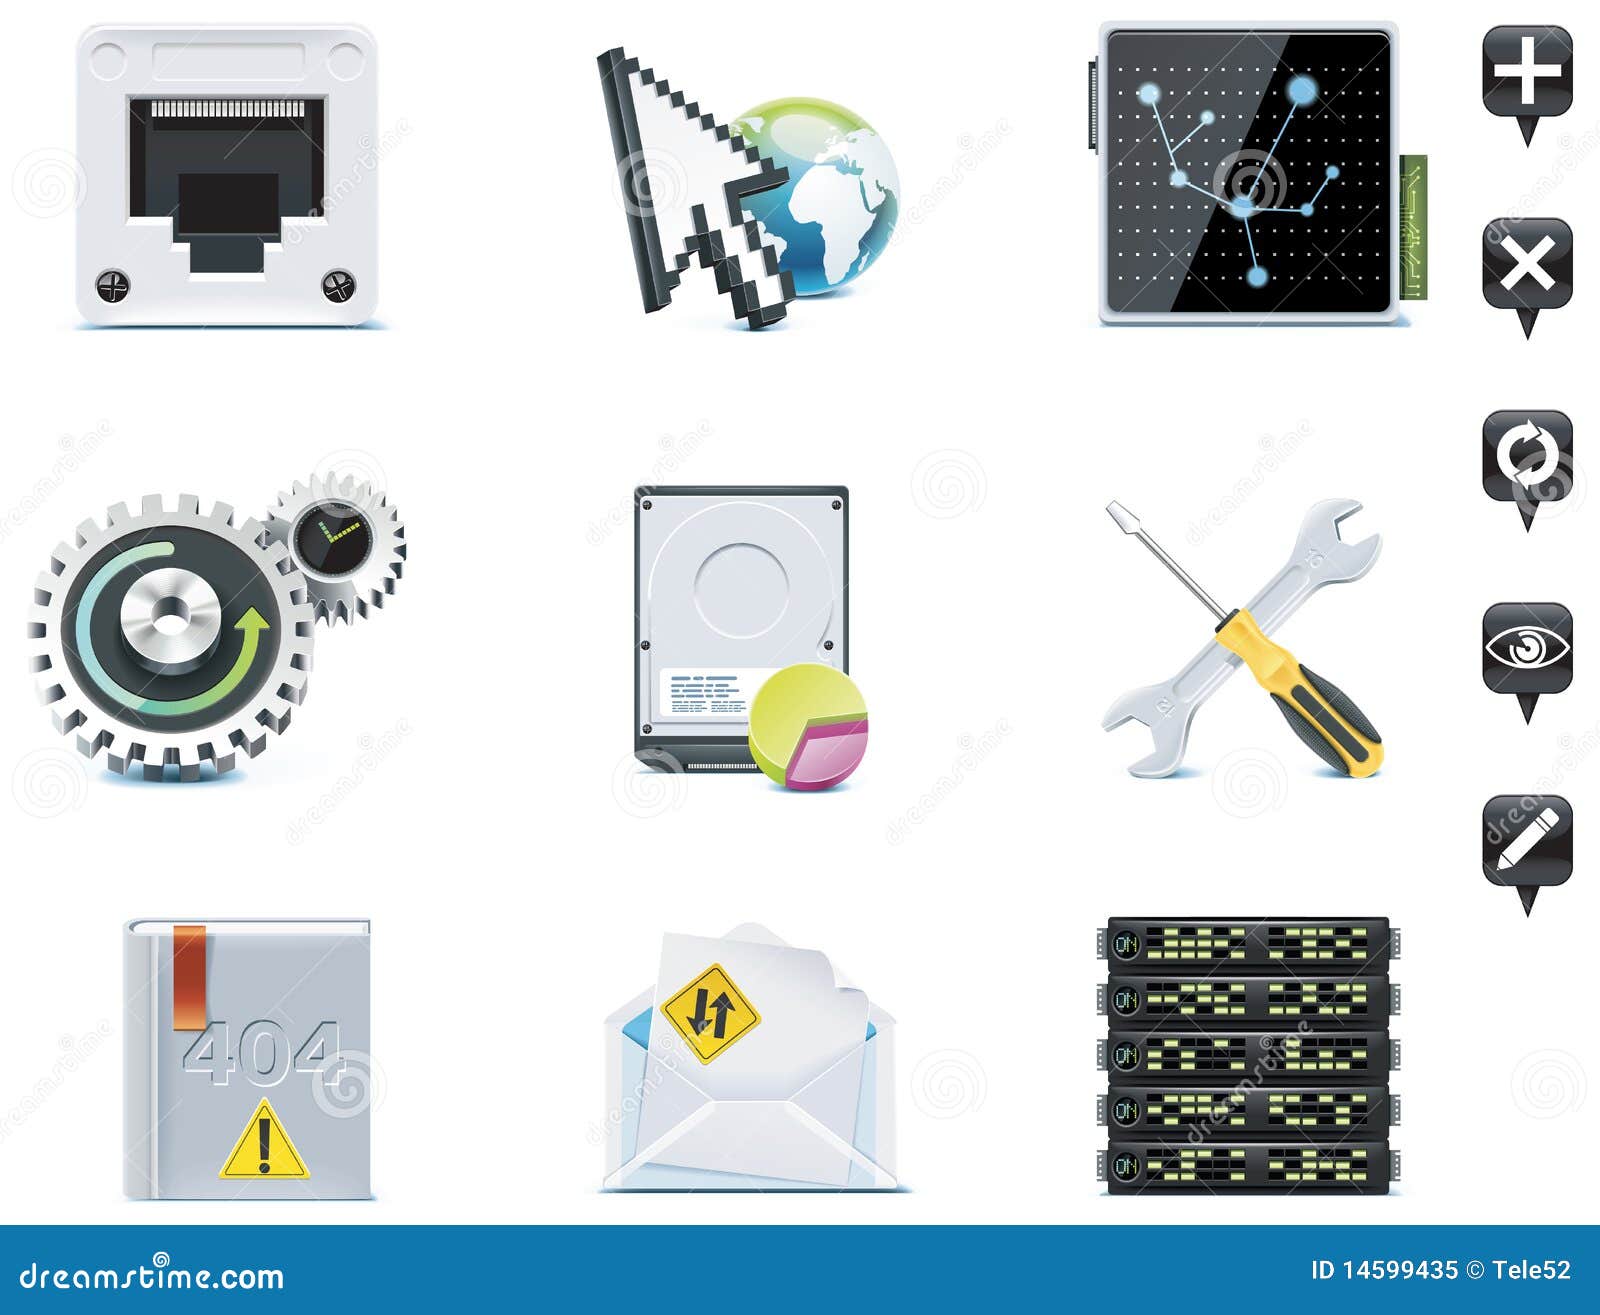 server administration icons. part 3